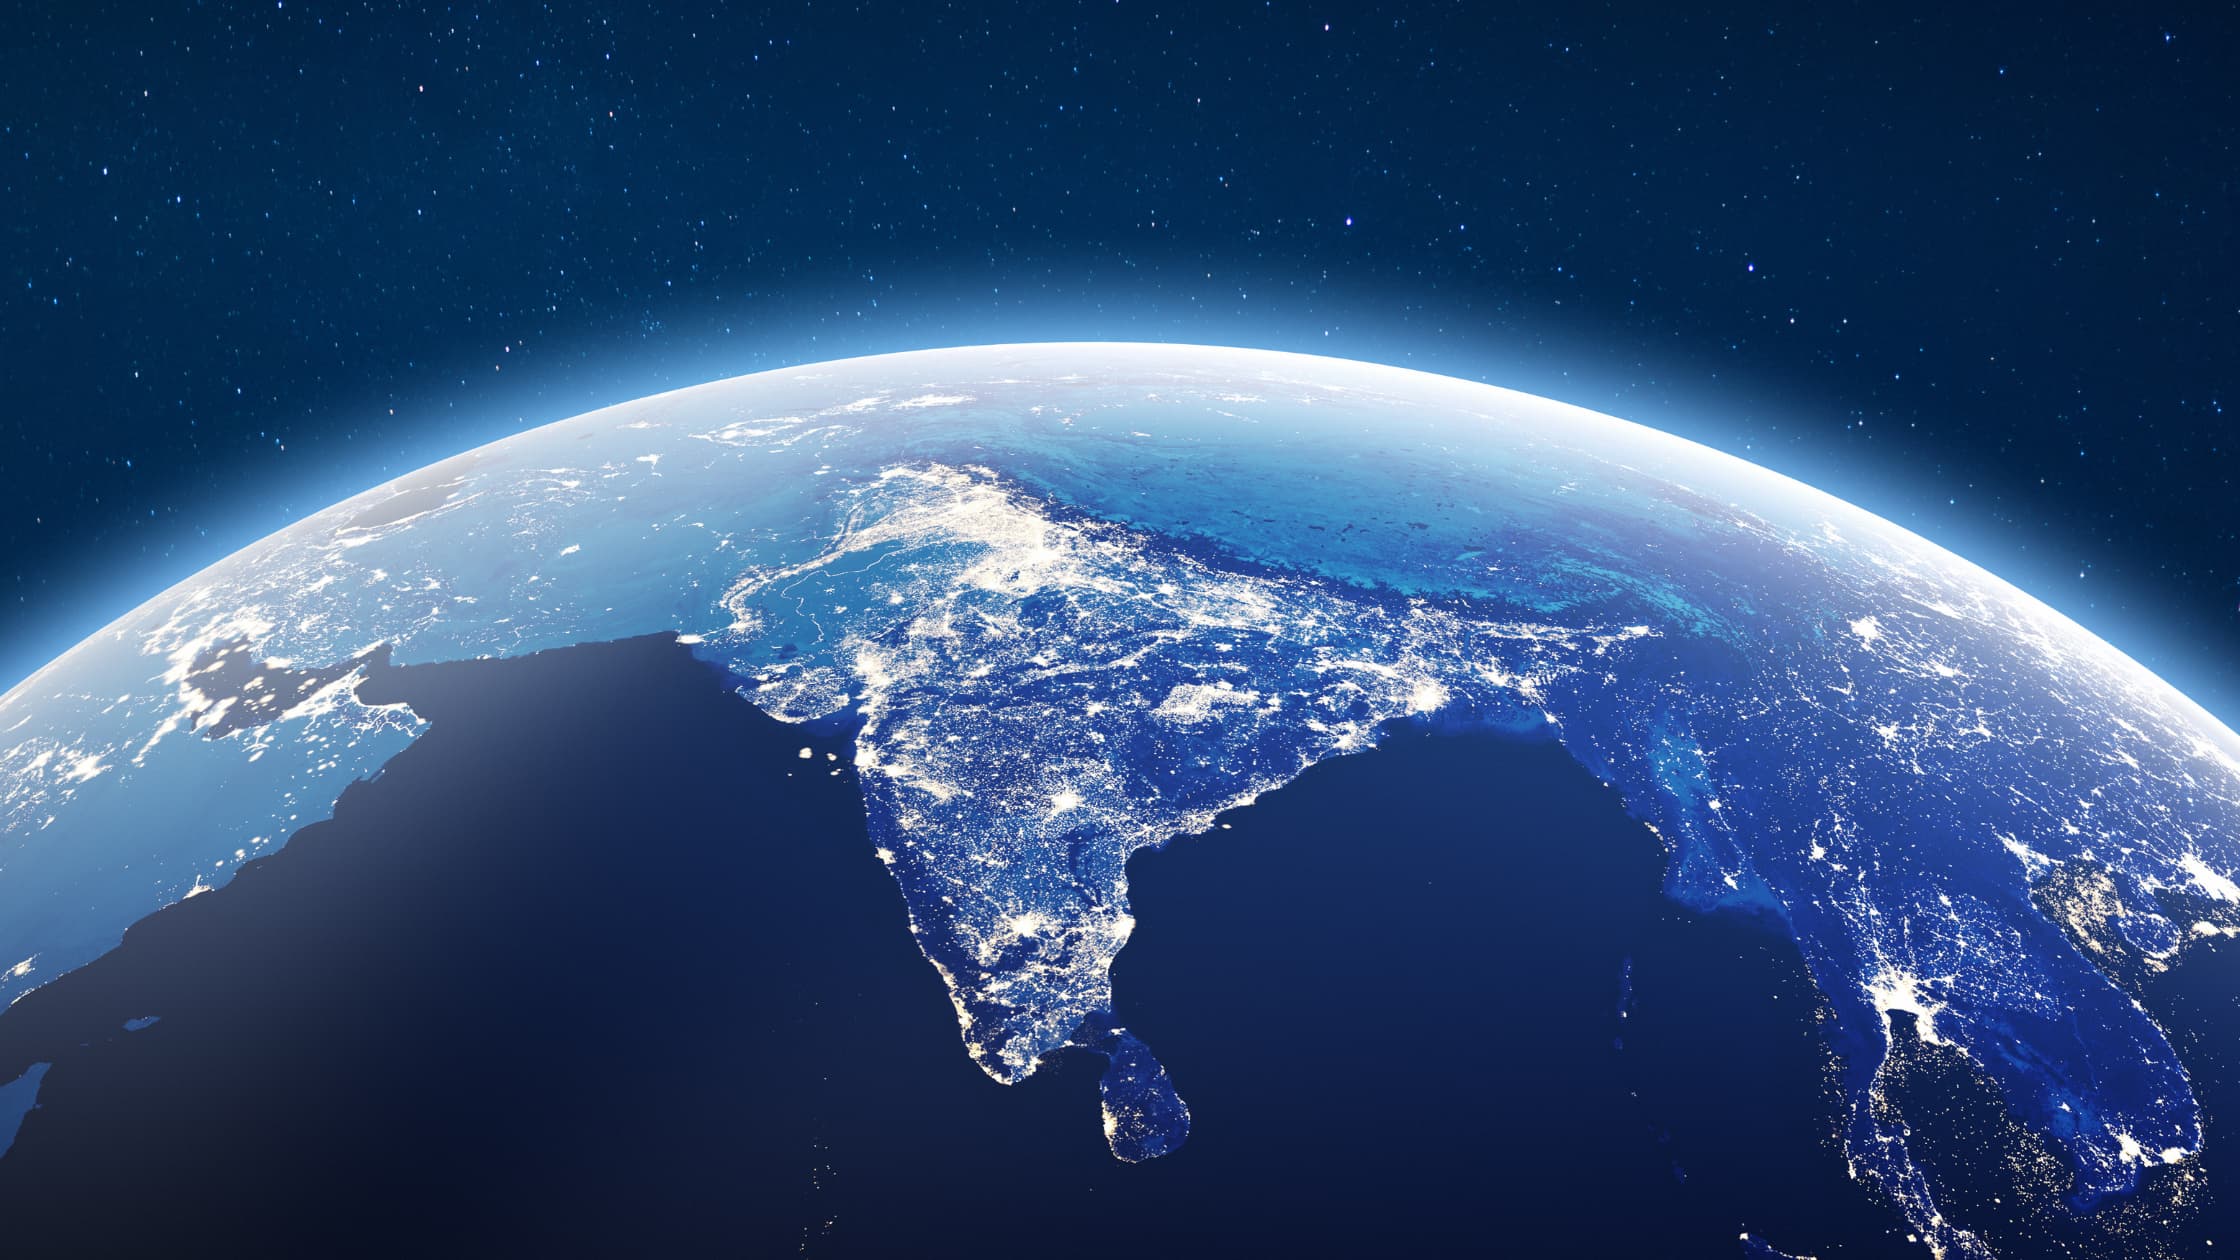 India at night, seen from space.